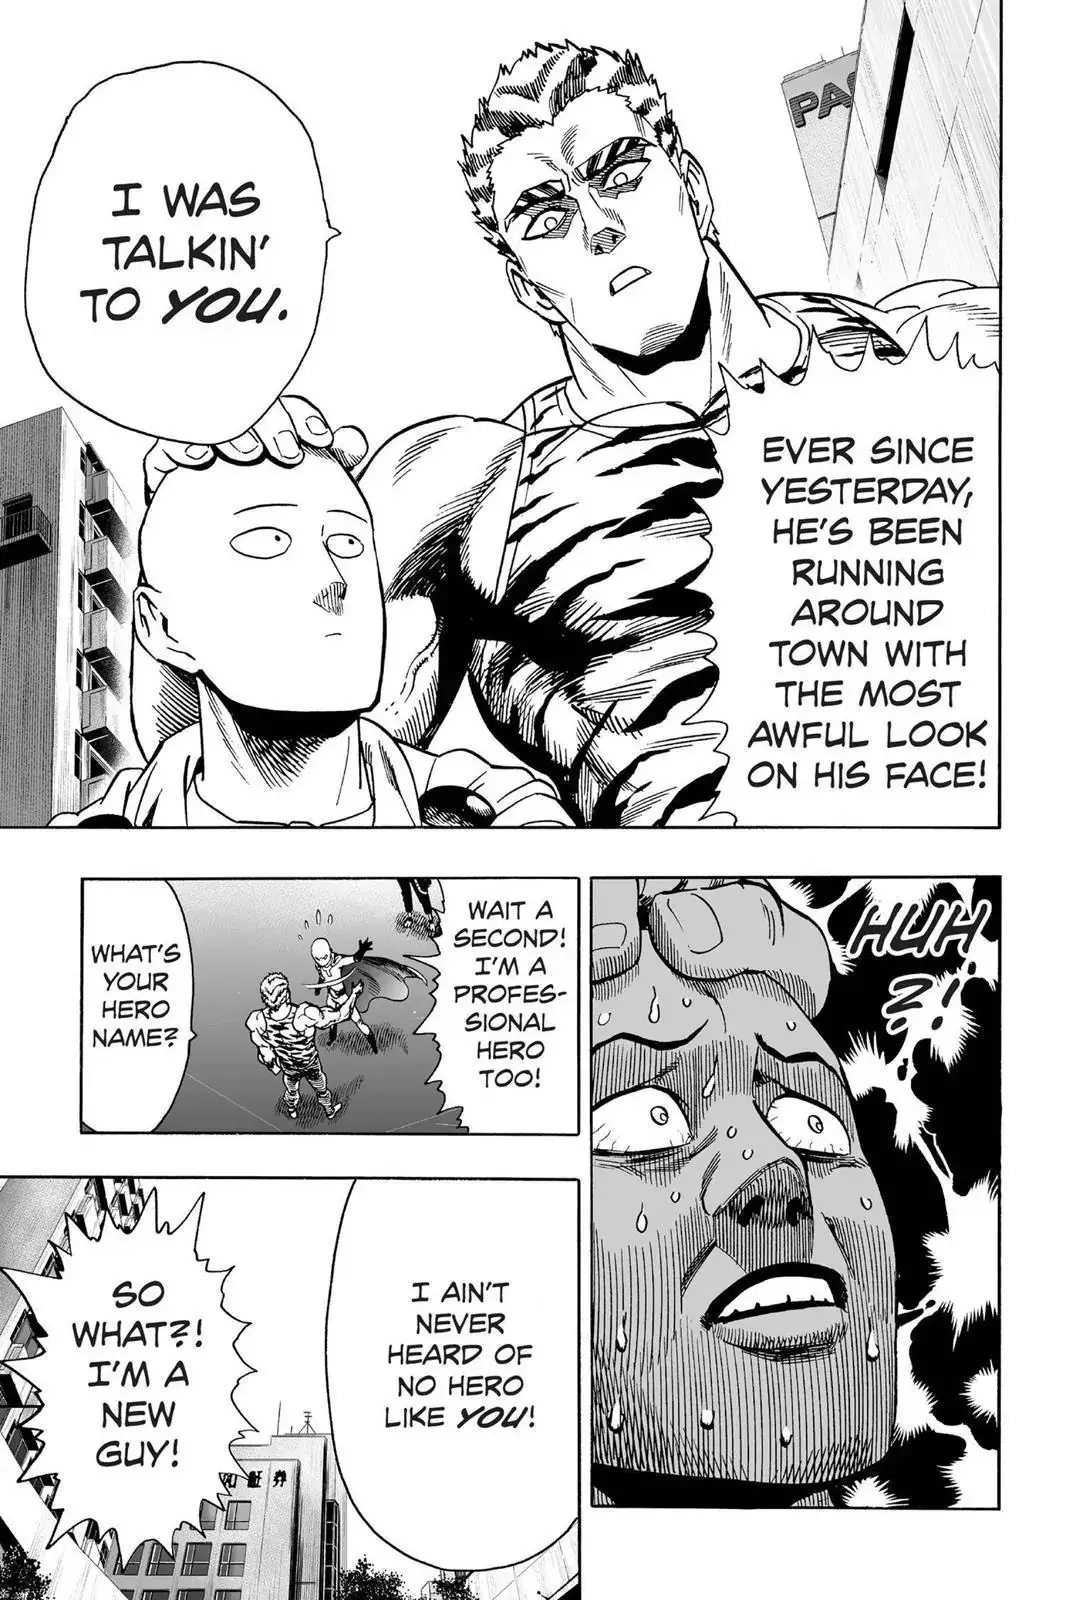 One Punch Man Chapter 19, READ One Punch Man Chapter 19 ONLINE, lost in the cloud genre,lost in the cloud gif,lost in the cloud girl,lost in the cloud goods,lost in the cloud goodreads,lost in the cloud,lost ark cloud gaming,lost odyssey cloud gaming,lost in the cloud fanart,lost in the cloud fanfic,lost in the cloud fandom,lost in the cloud first kiss,lost in the cloud font,lost in the cloud ending,lost in the cloud episode 97,lost in the cloud edit,lost in the cloud explained,lost in the cloud dog,lost in the cloud discord server,lost in the cloud desktop wallpaper,lost in the cloud drawing,can't find my cloud on network,lost in the cloud characters,lost in the cloud chapter 93 release date,lost in the cloud birthday,lost in the cloud birthday art,lost in the cloud background,lost in the cloud banner,lost in the clouds meaning,what is the black cloud in lost,lost in the cloud ao3,lost in the cloud anime,lost in the cloud art,lost in the cloud author twitter,lost in the cloud author instagram,lost in the cloud artist,lost in the cloud acrylic stand,lost in the cloud artist twitter,lost in the cloud art style,lost in the cloud analysis